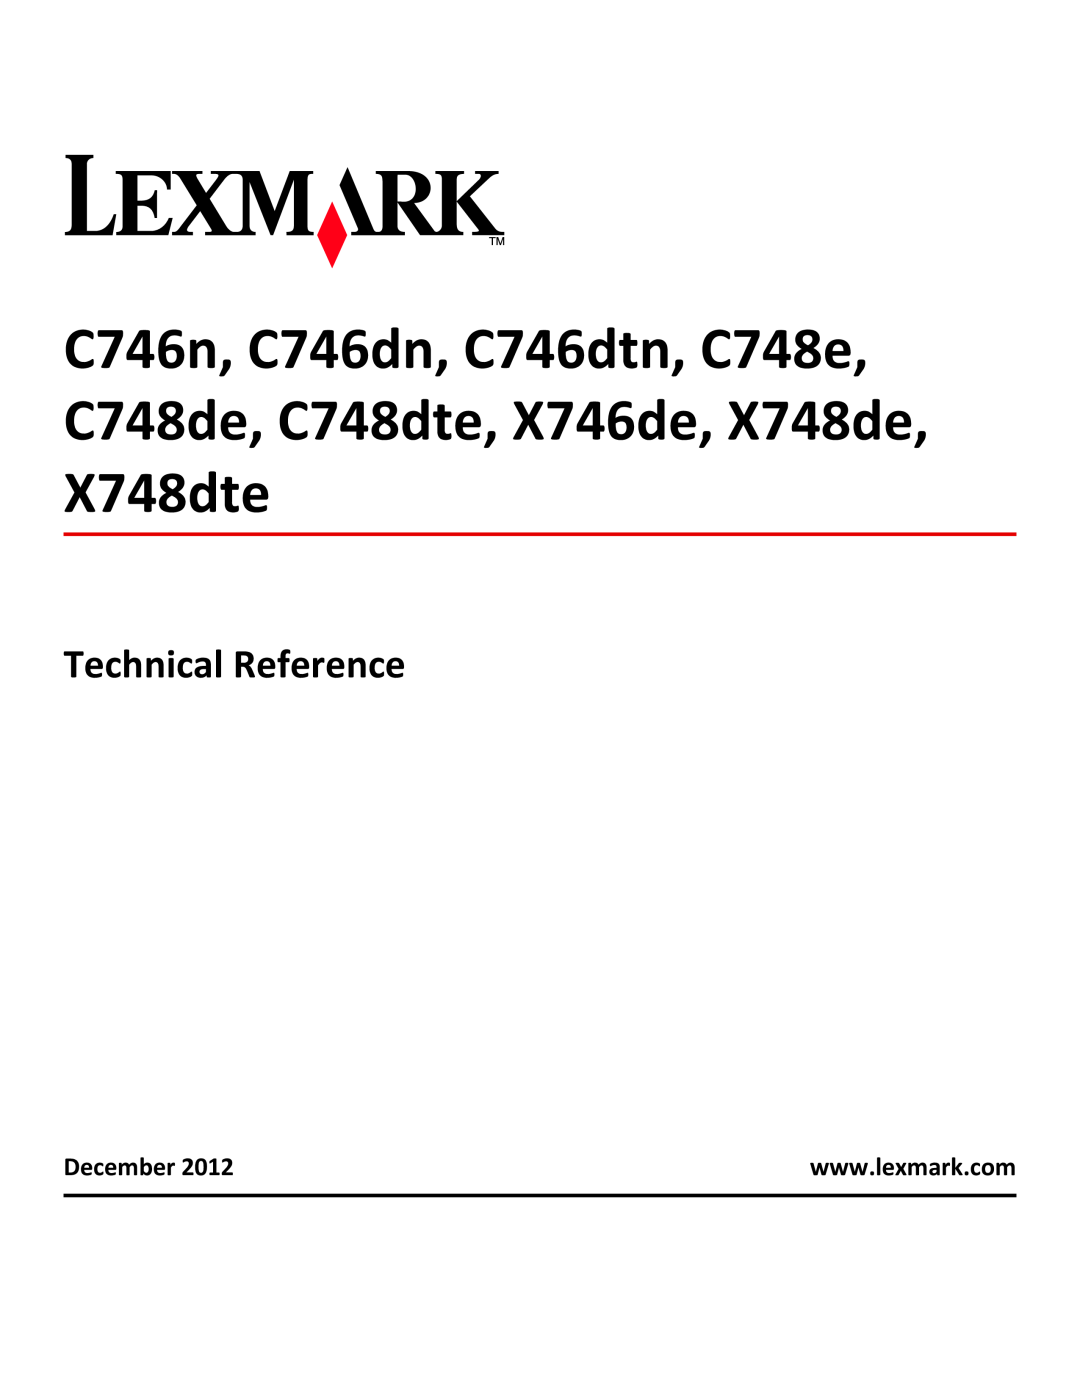 Lexmark manual Technical Reference, December, C746n, C746dn, C746dtn, C748e, C748de, C748dte, X746de, X748de X748dte 